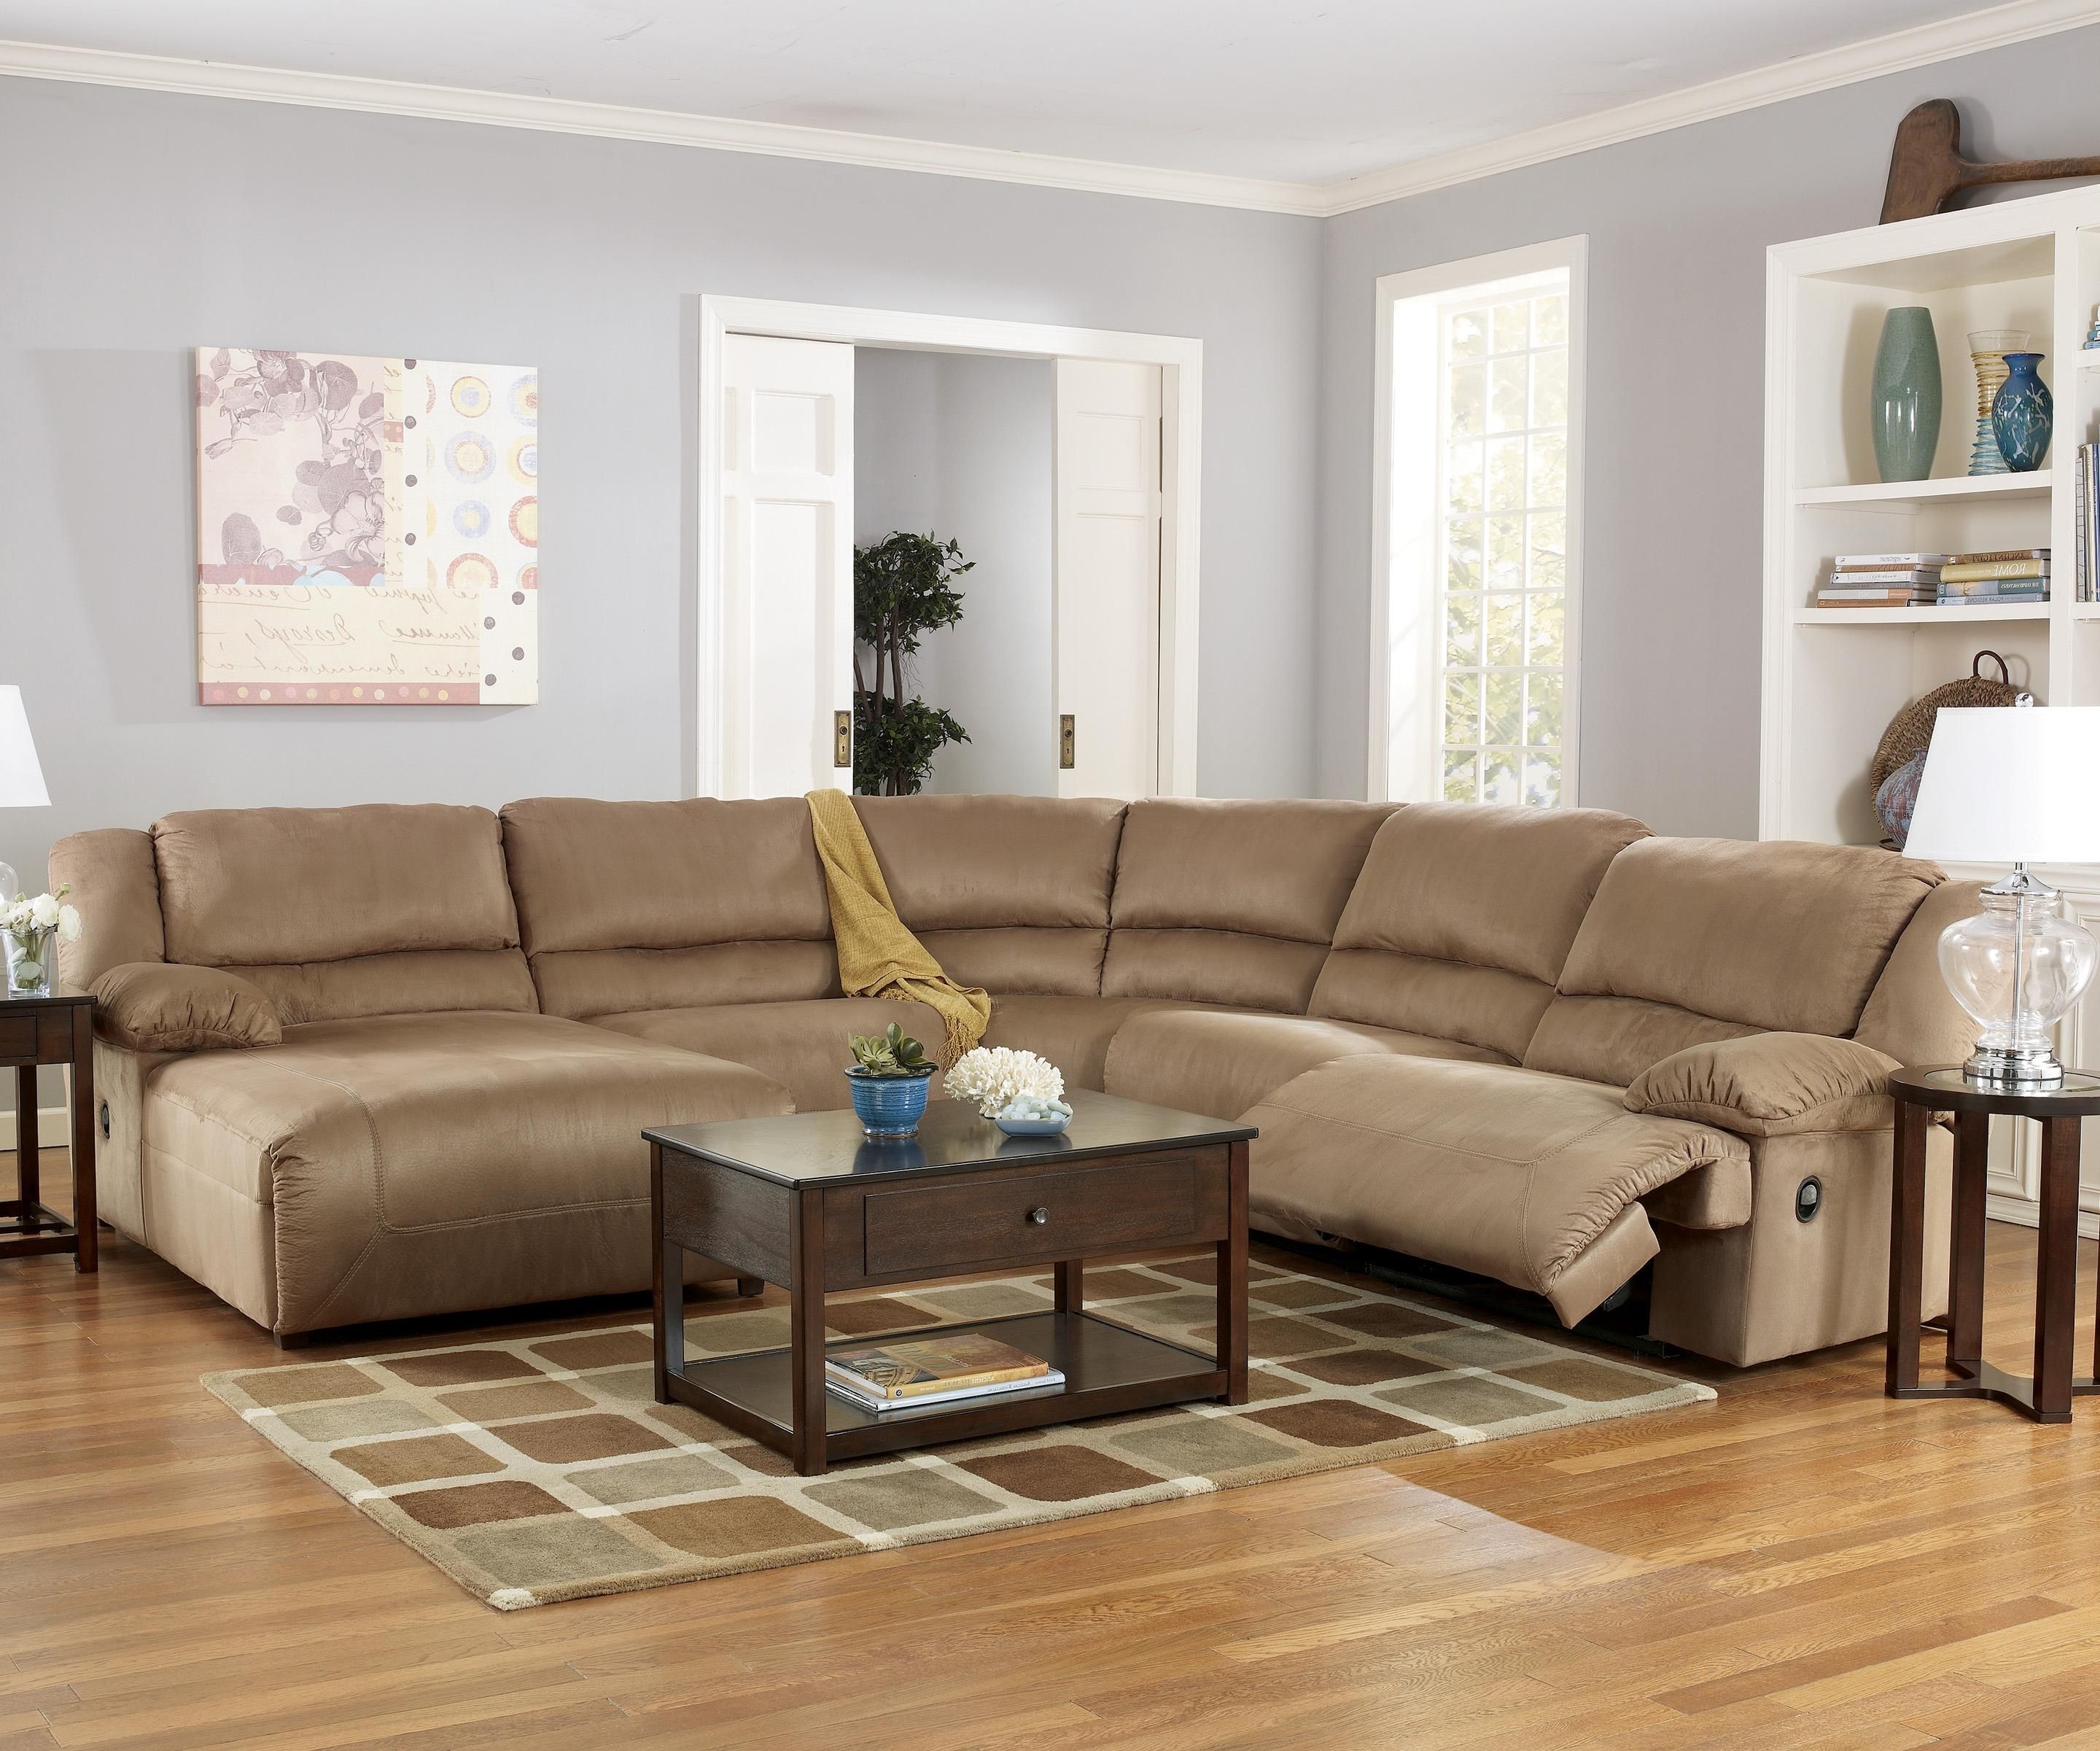 Ashleys Furniture Within Fashionable El Paso Sectional Sofas (View 15 of 15)